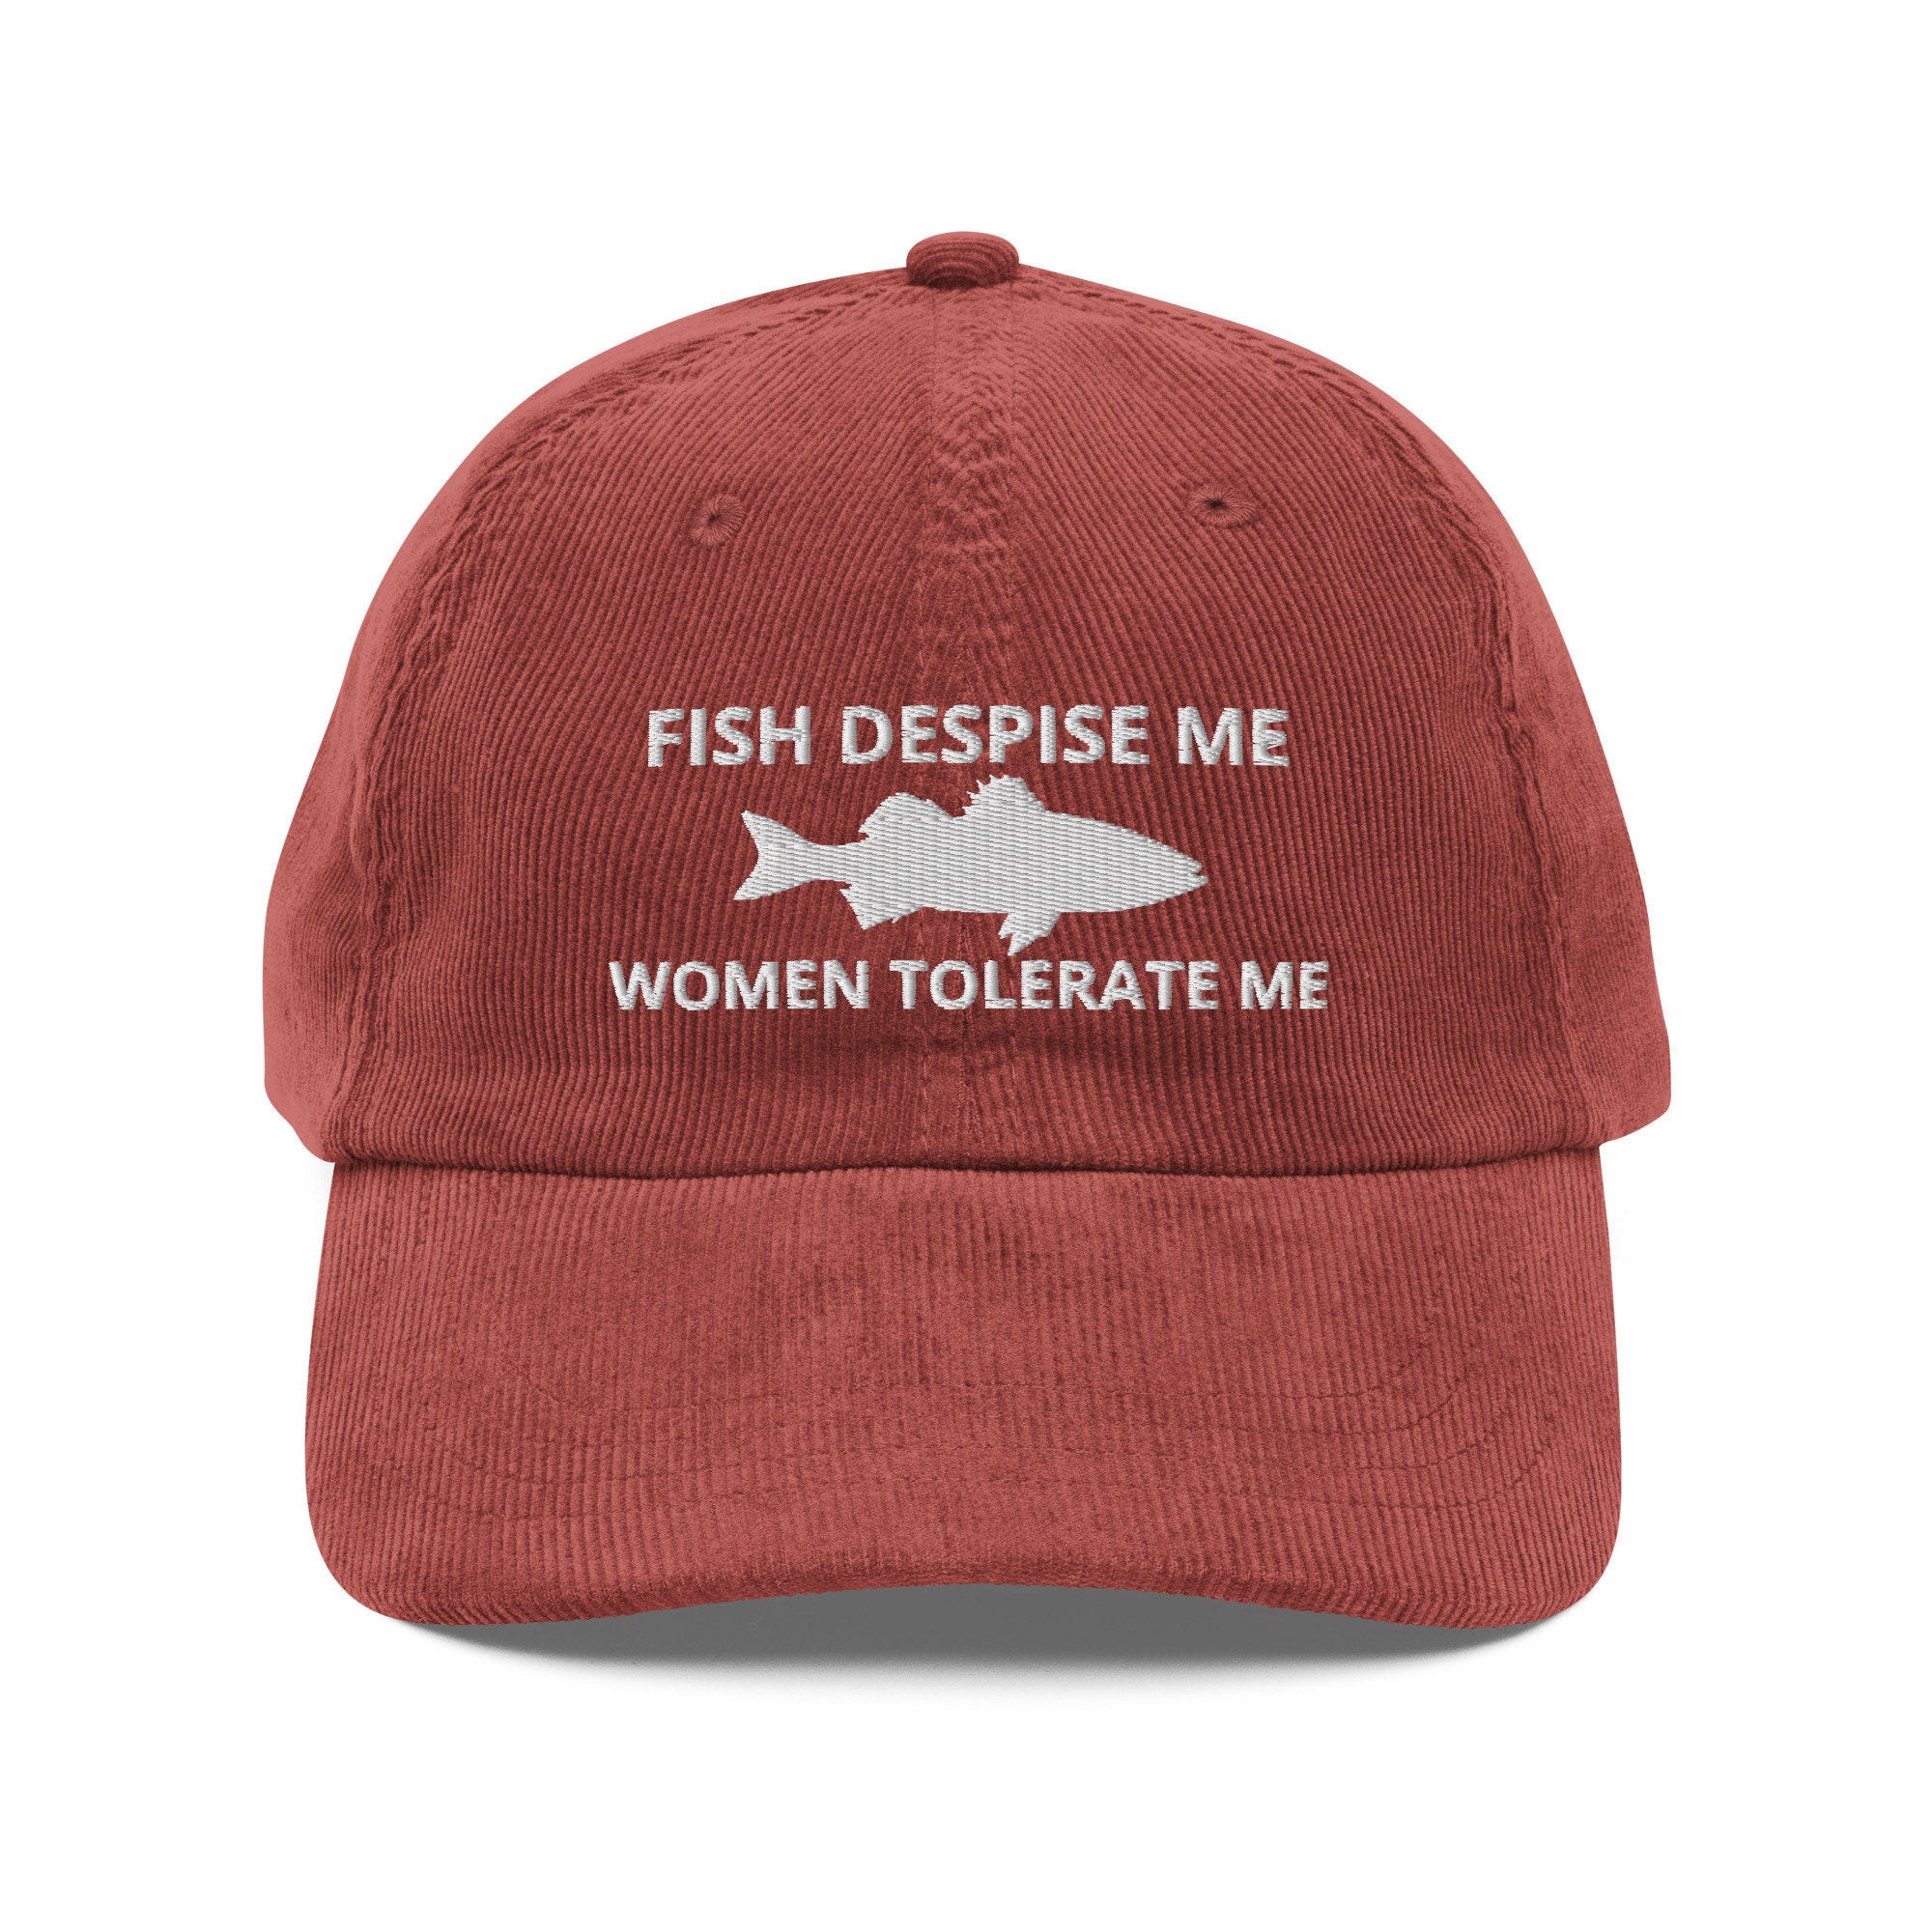 Fish Despise Me Women Tolerate Me Embroidered Corduroy Hat Gift